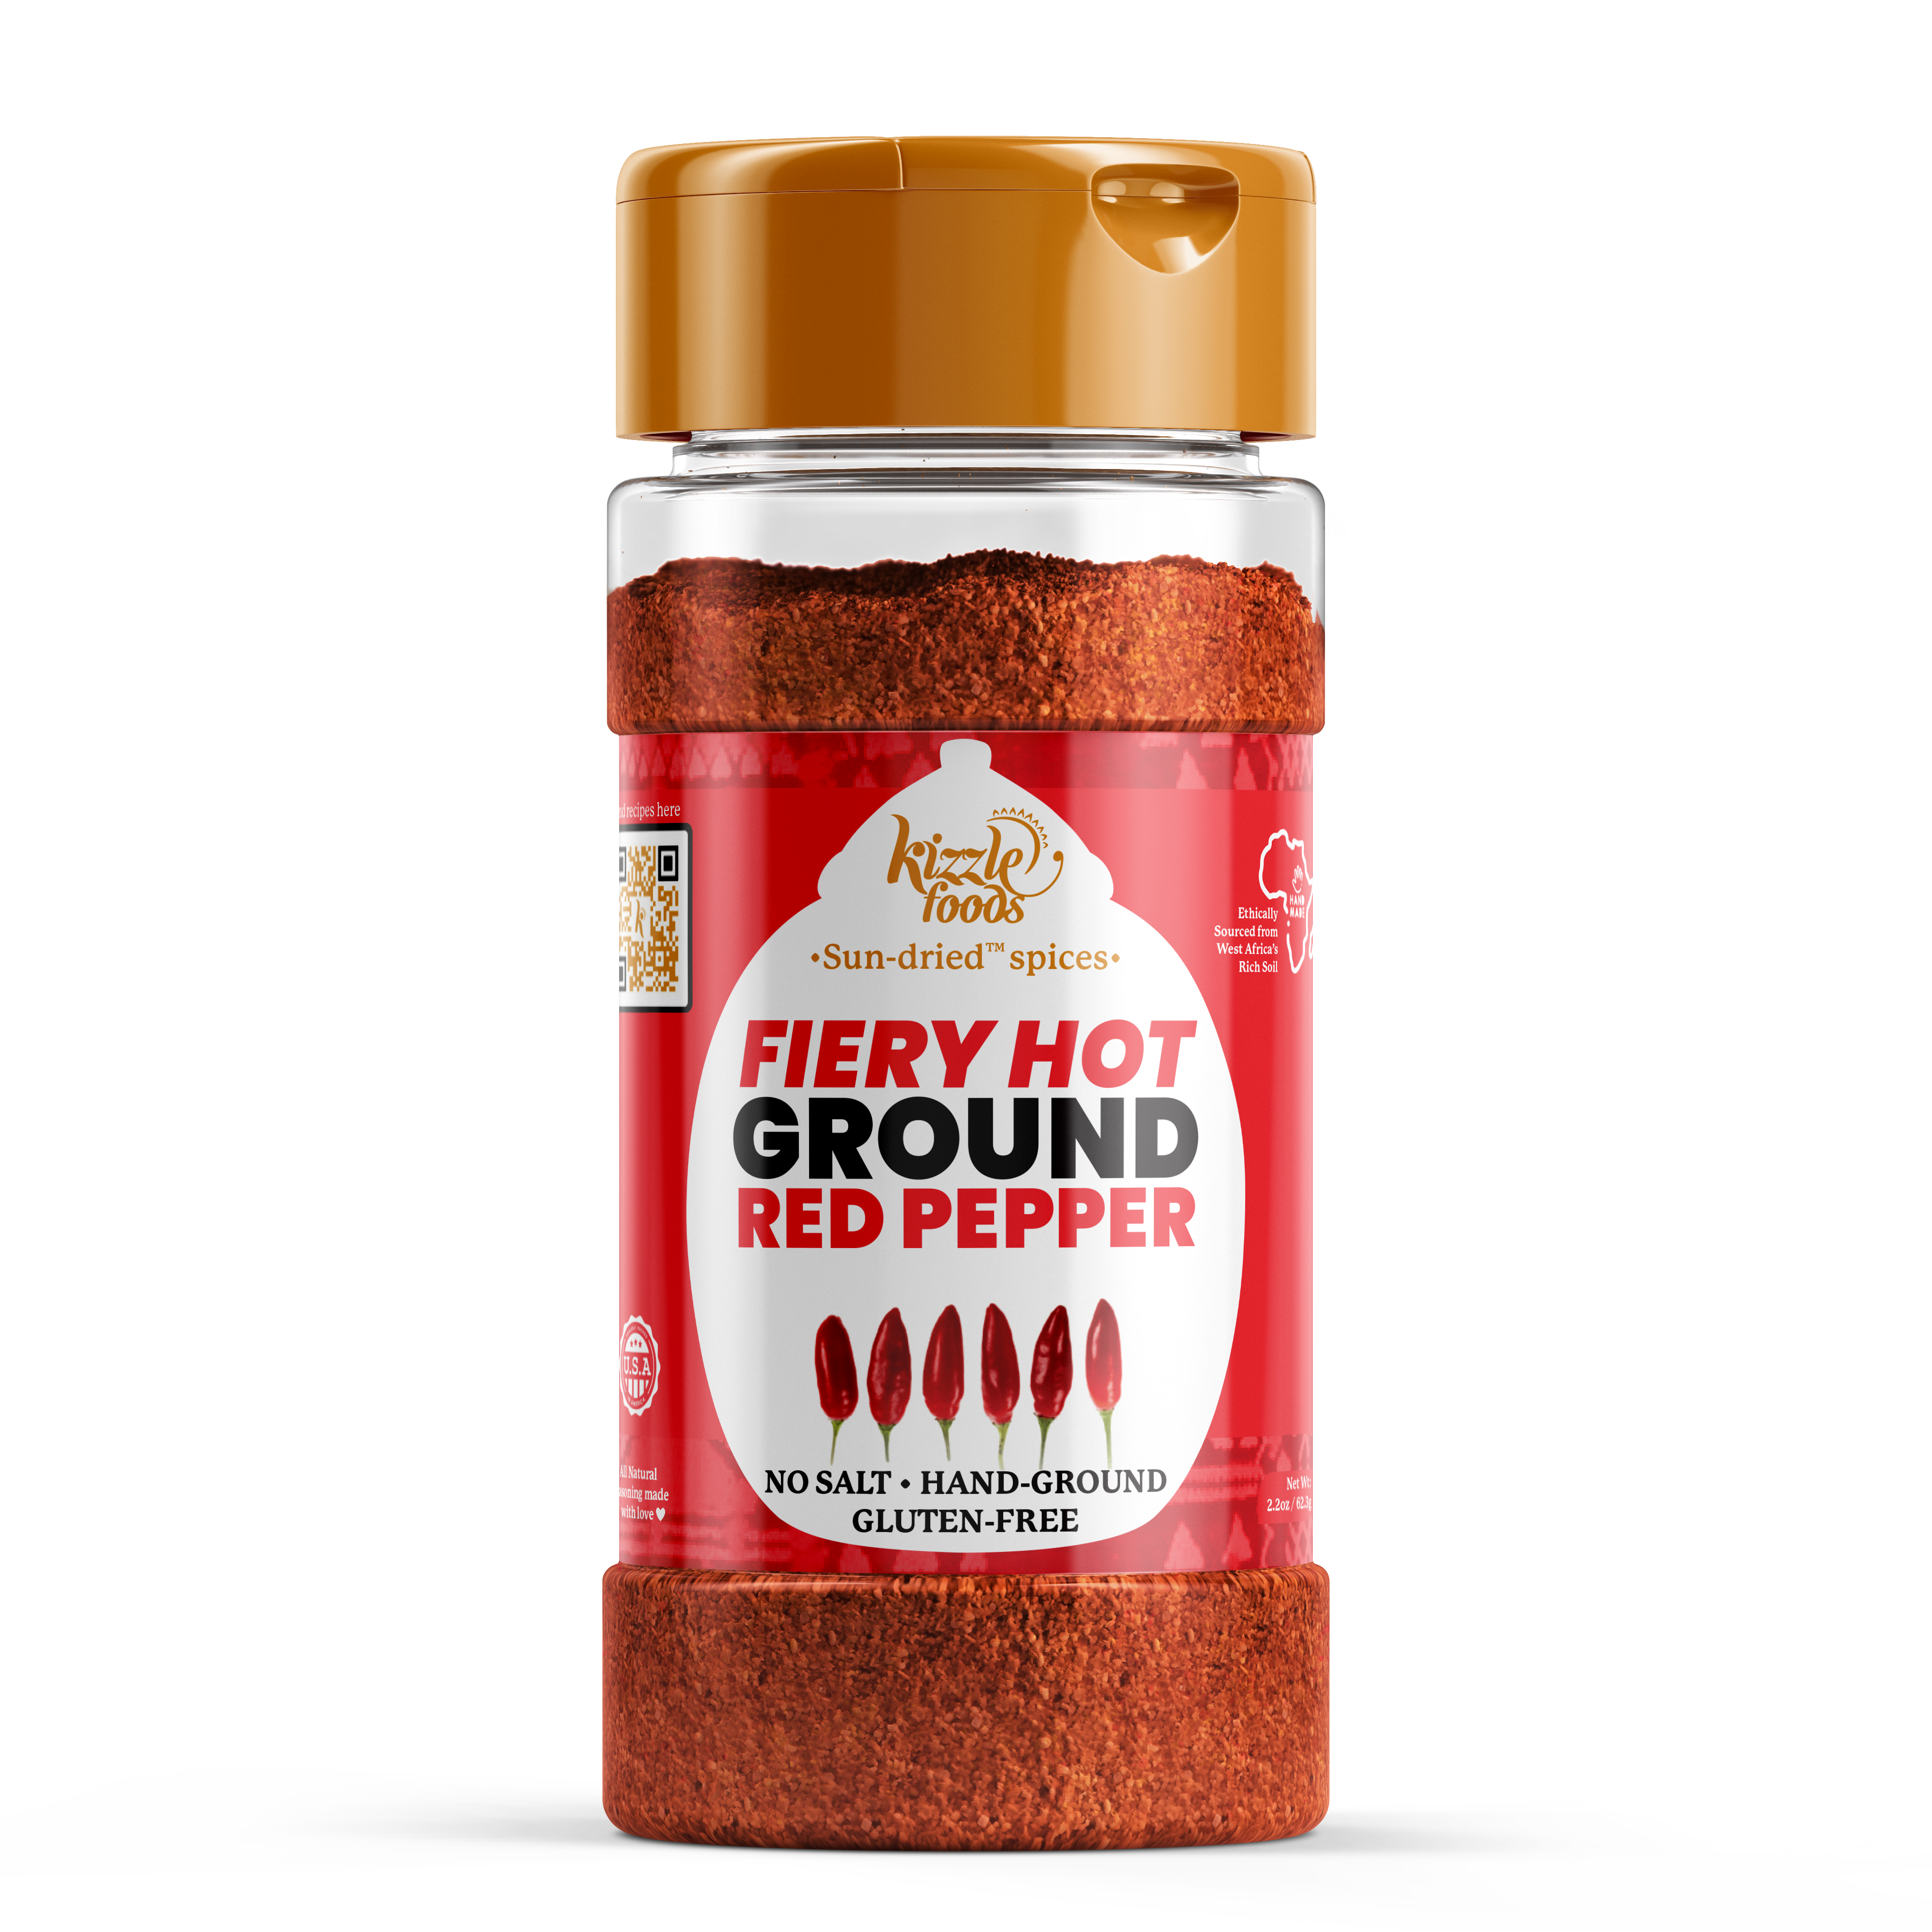 KizzleFoods Fiery HOT, Ground Red Pepper, 2.2 oz